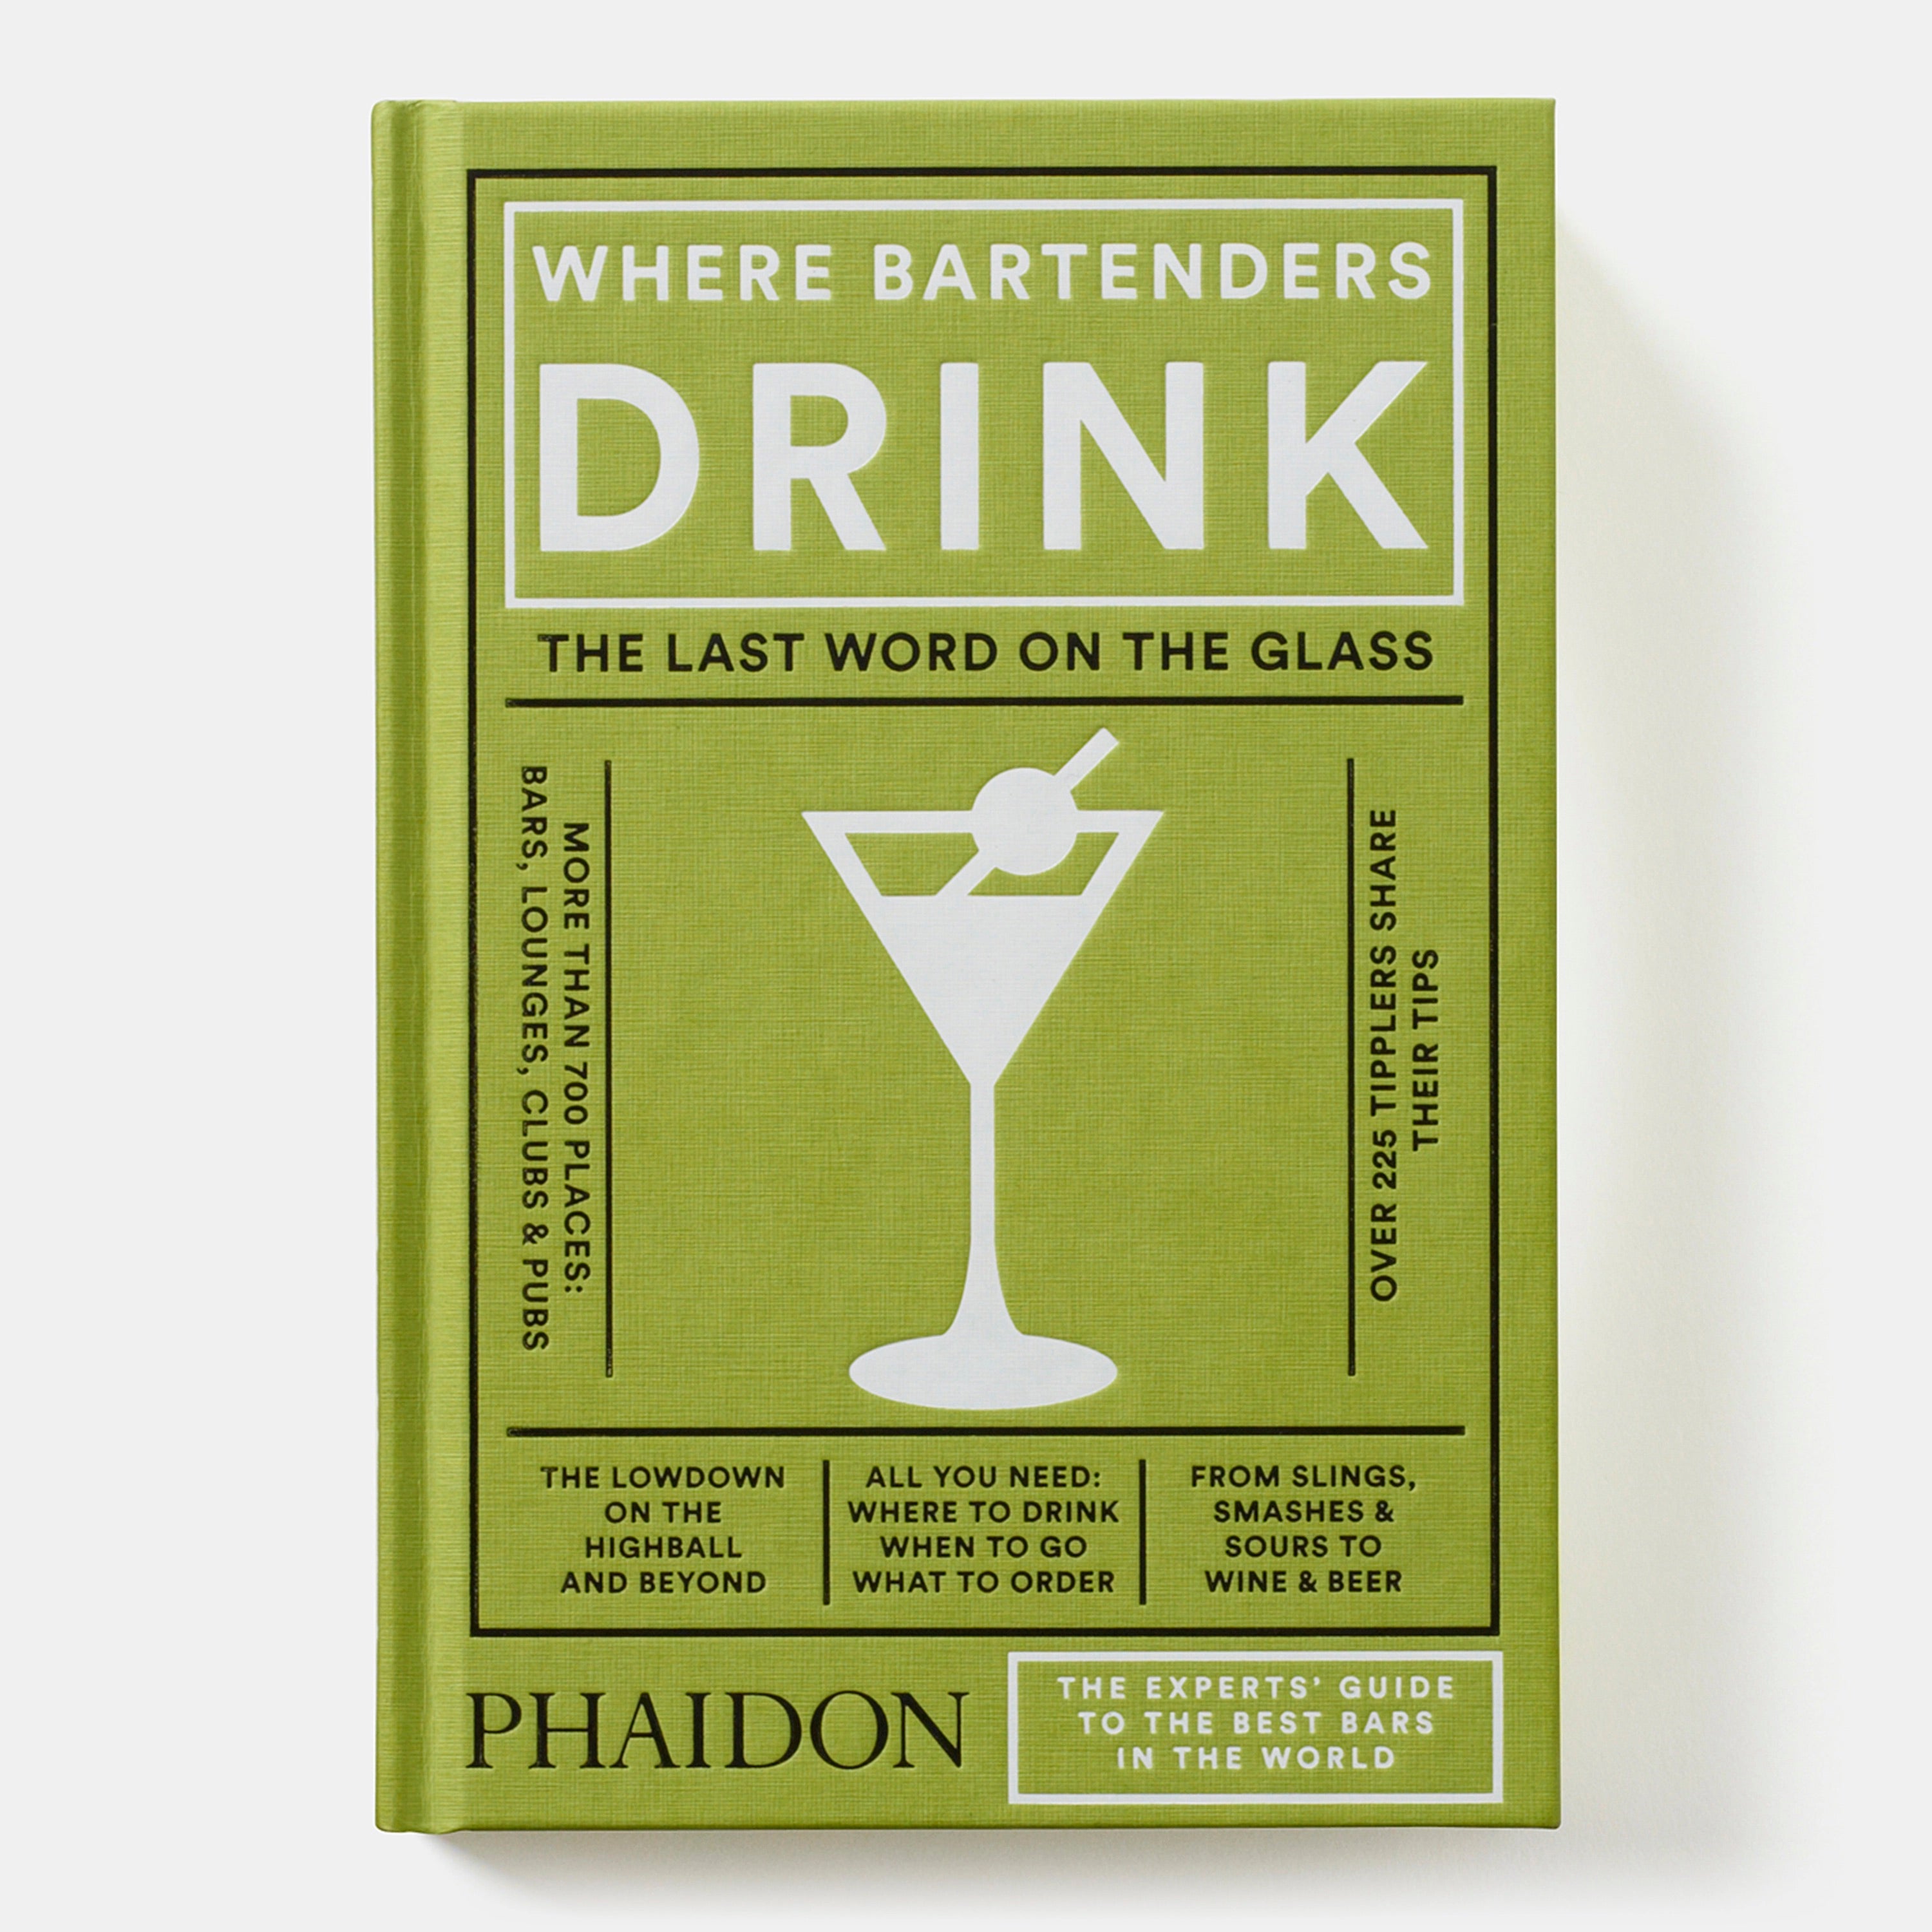 WHERE BARTENDERS DRINK: THE LAST WORD ON THE GLASS